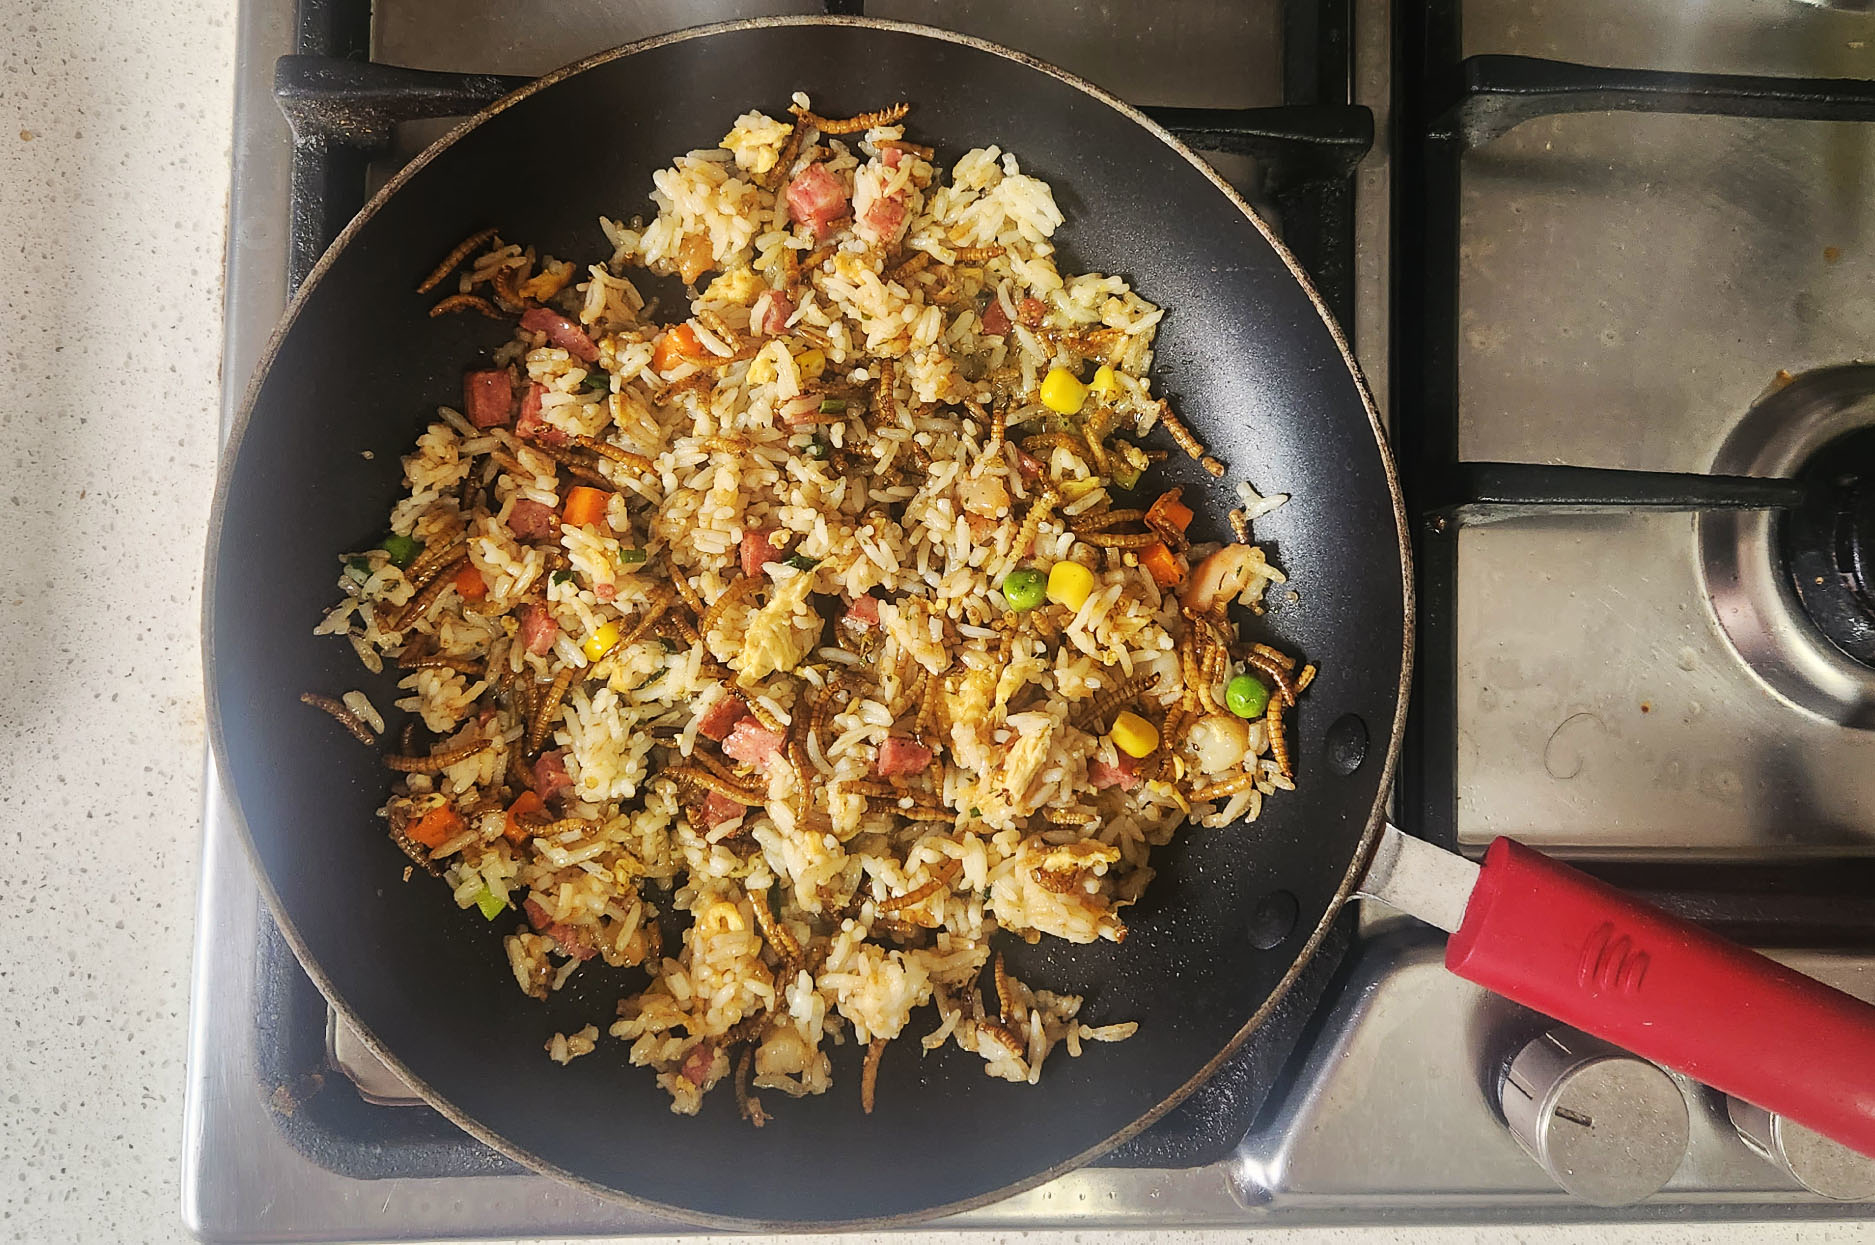 Mealworm fried rice